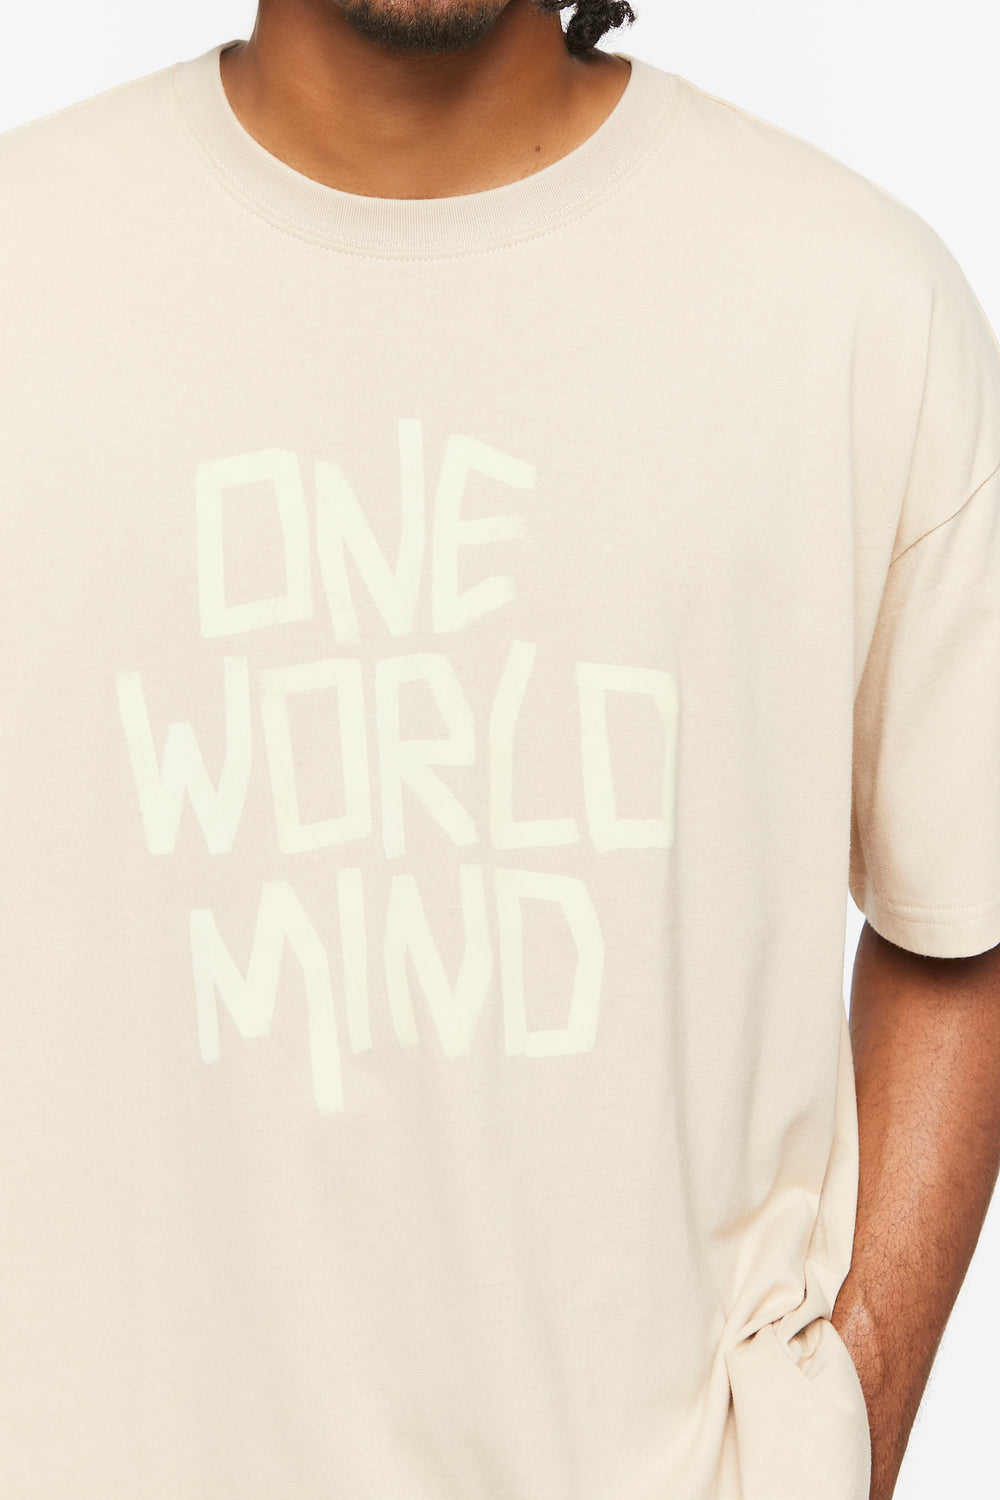 One World Mind Graphic Tee Taupe